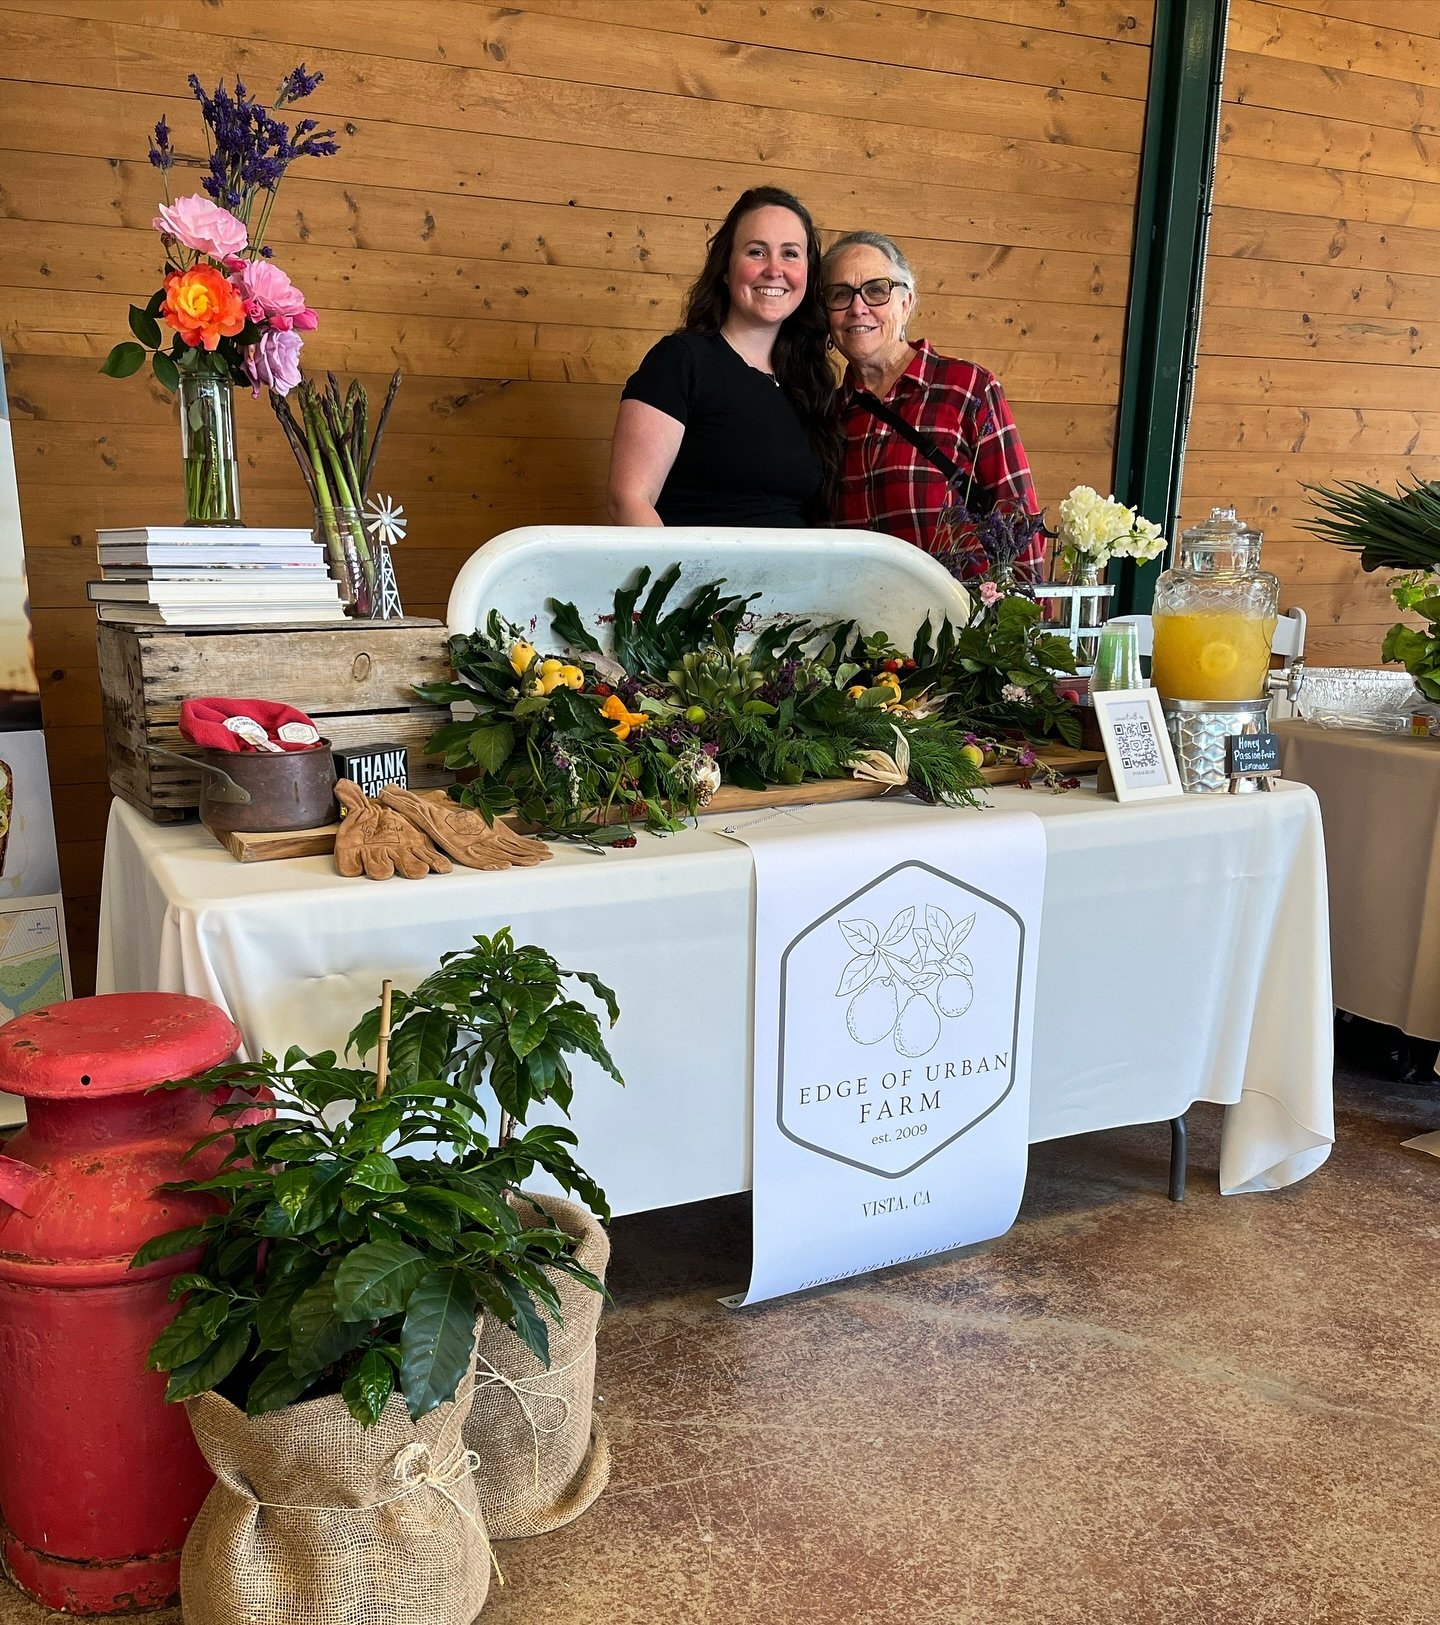 We had so much fun doing the @sdfarmbureau GRAZE at @flowerfieldsevents last night. Hello to all of our new followers! Thanks for coming along on this journey with us! So great to connect with so many amazing people.